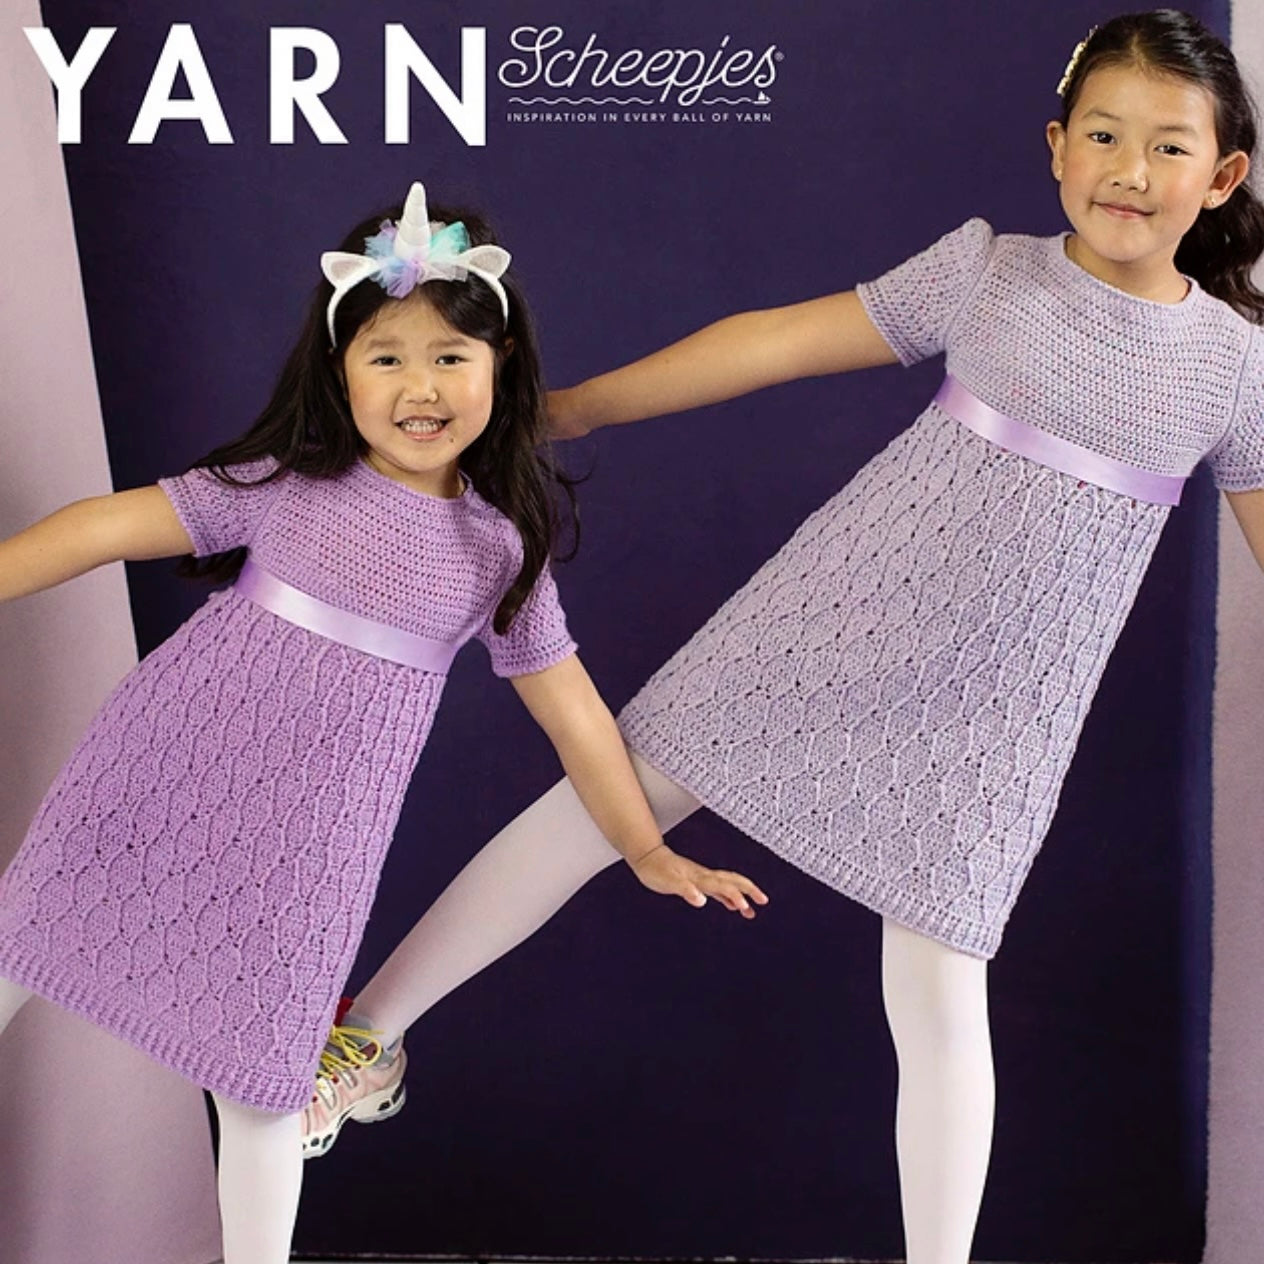 Yarn Bookazine 10 | The Colour Issue